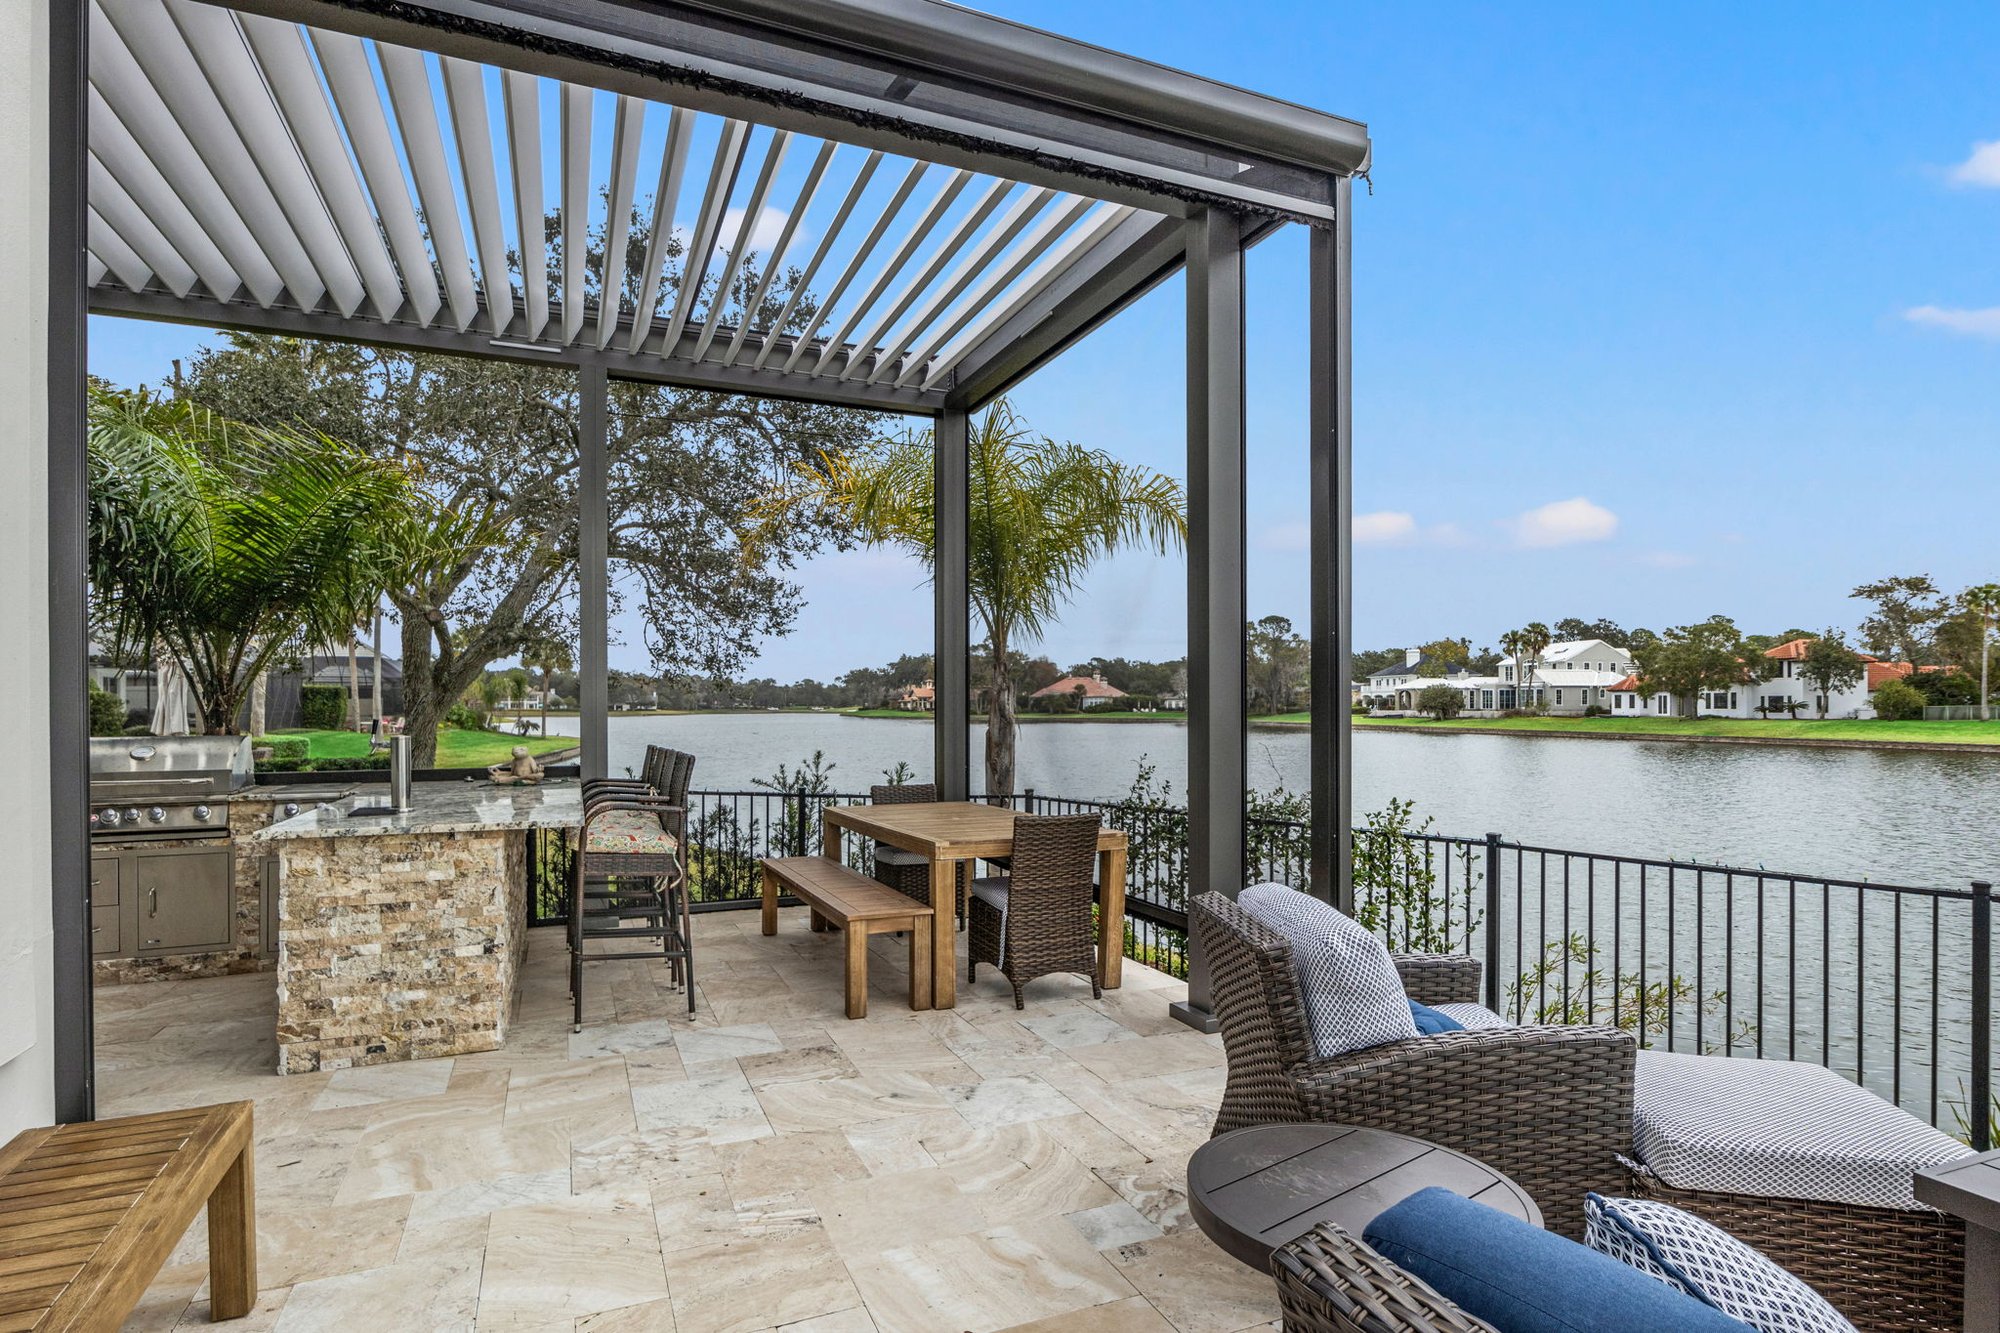 Beautiful Outdoor Living Area on Water with Summer Kitchen and Pergola